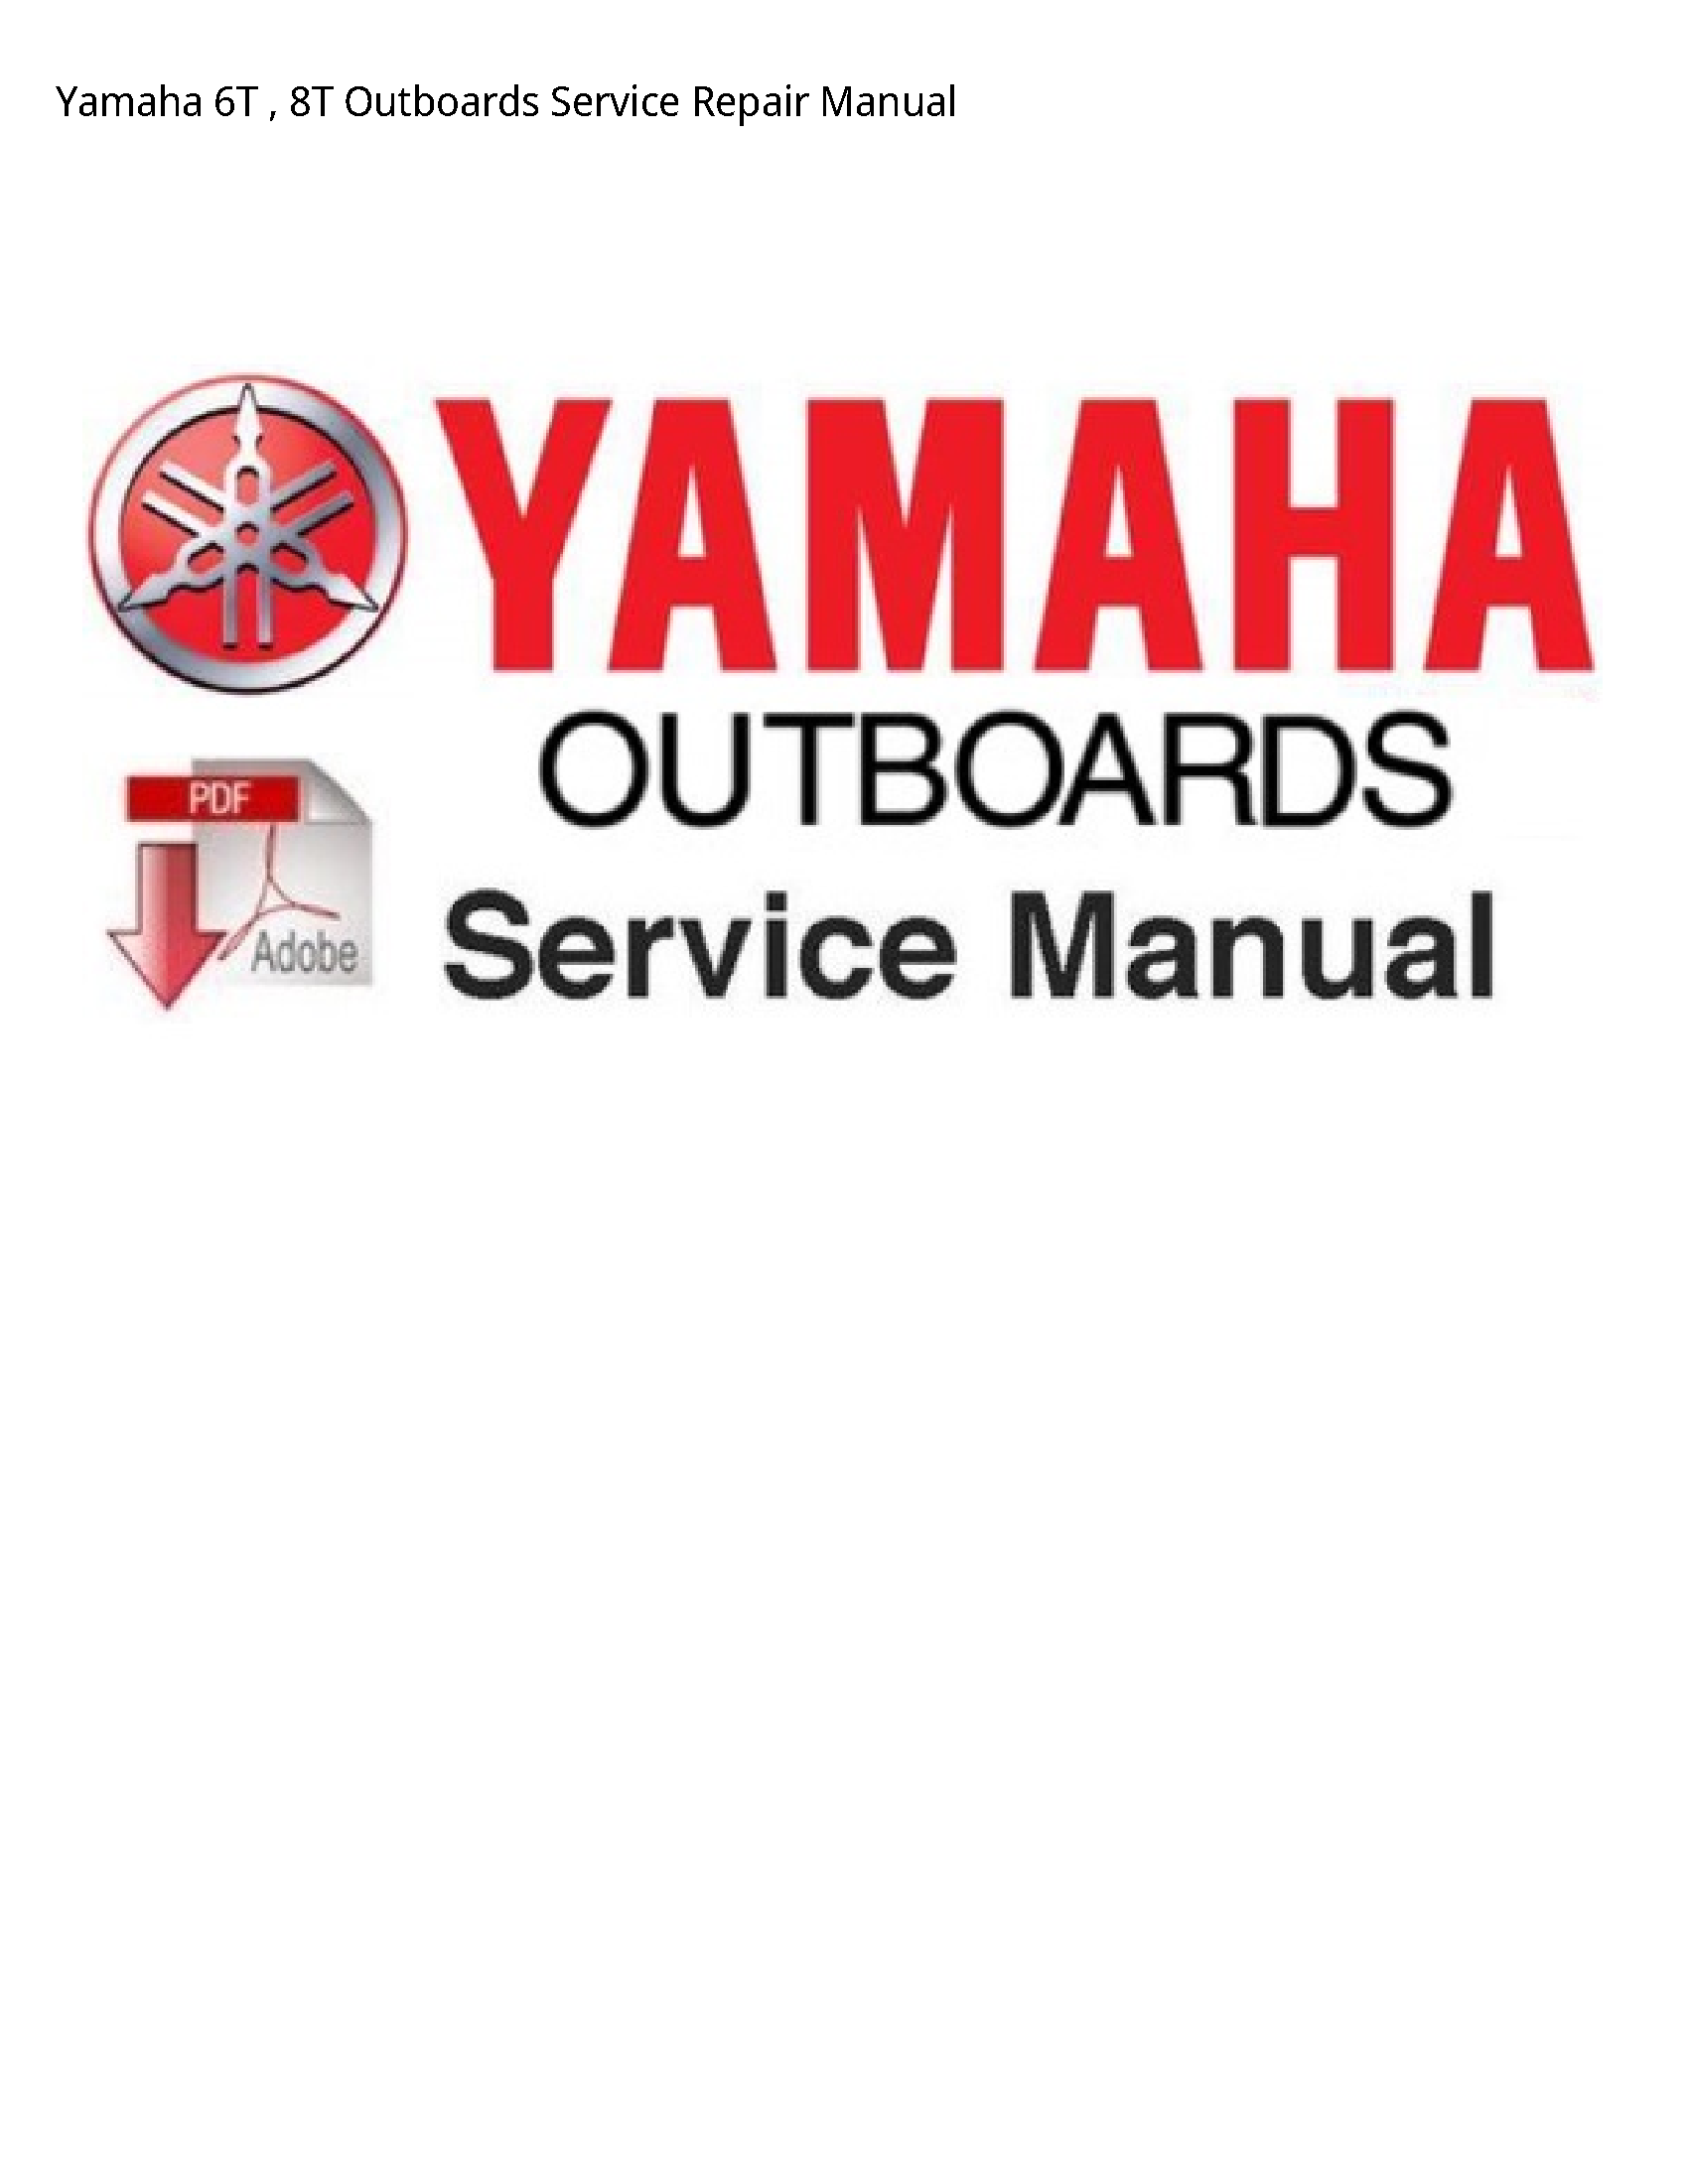 Yamaha 6T Outboards manual